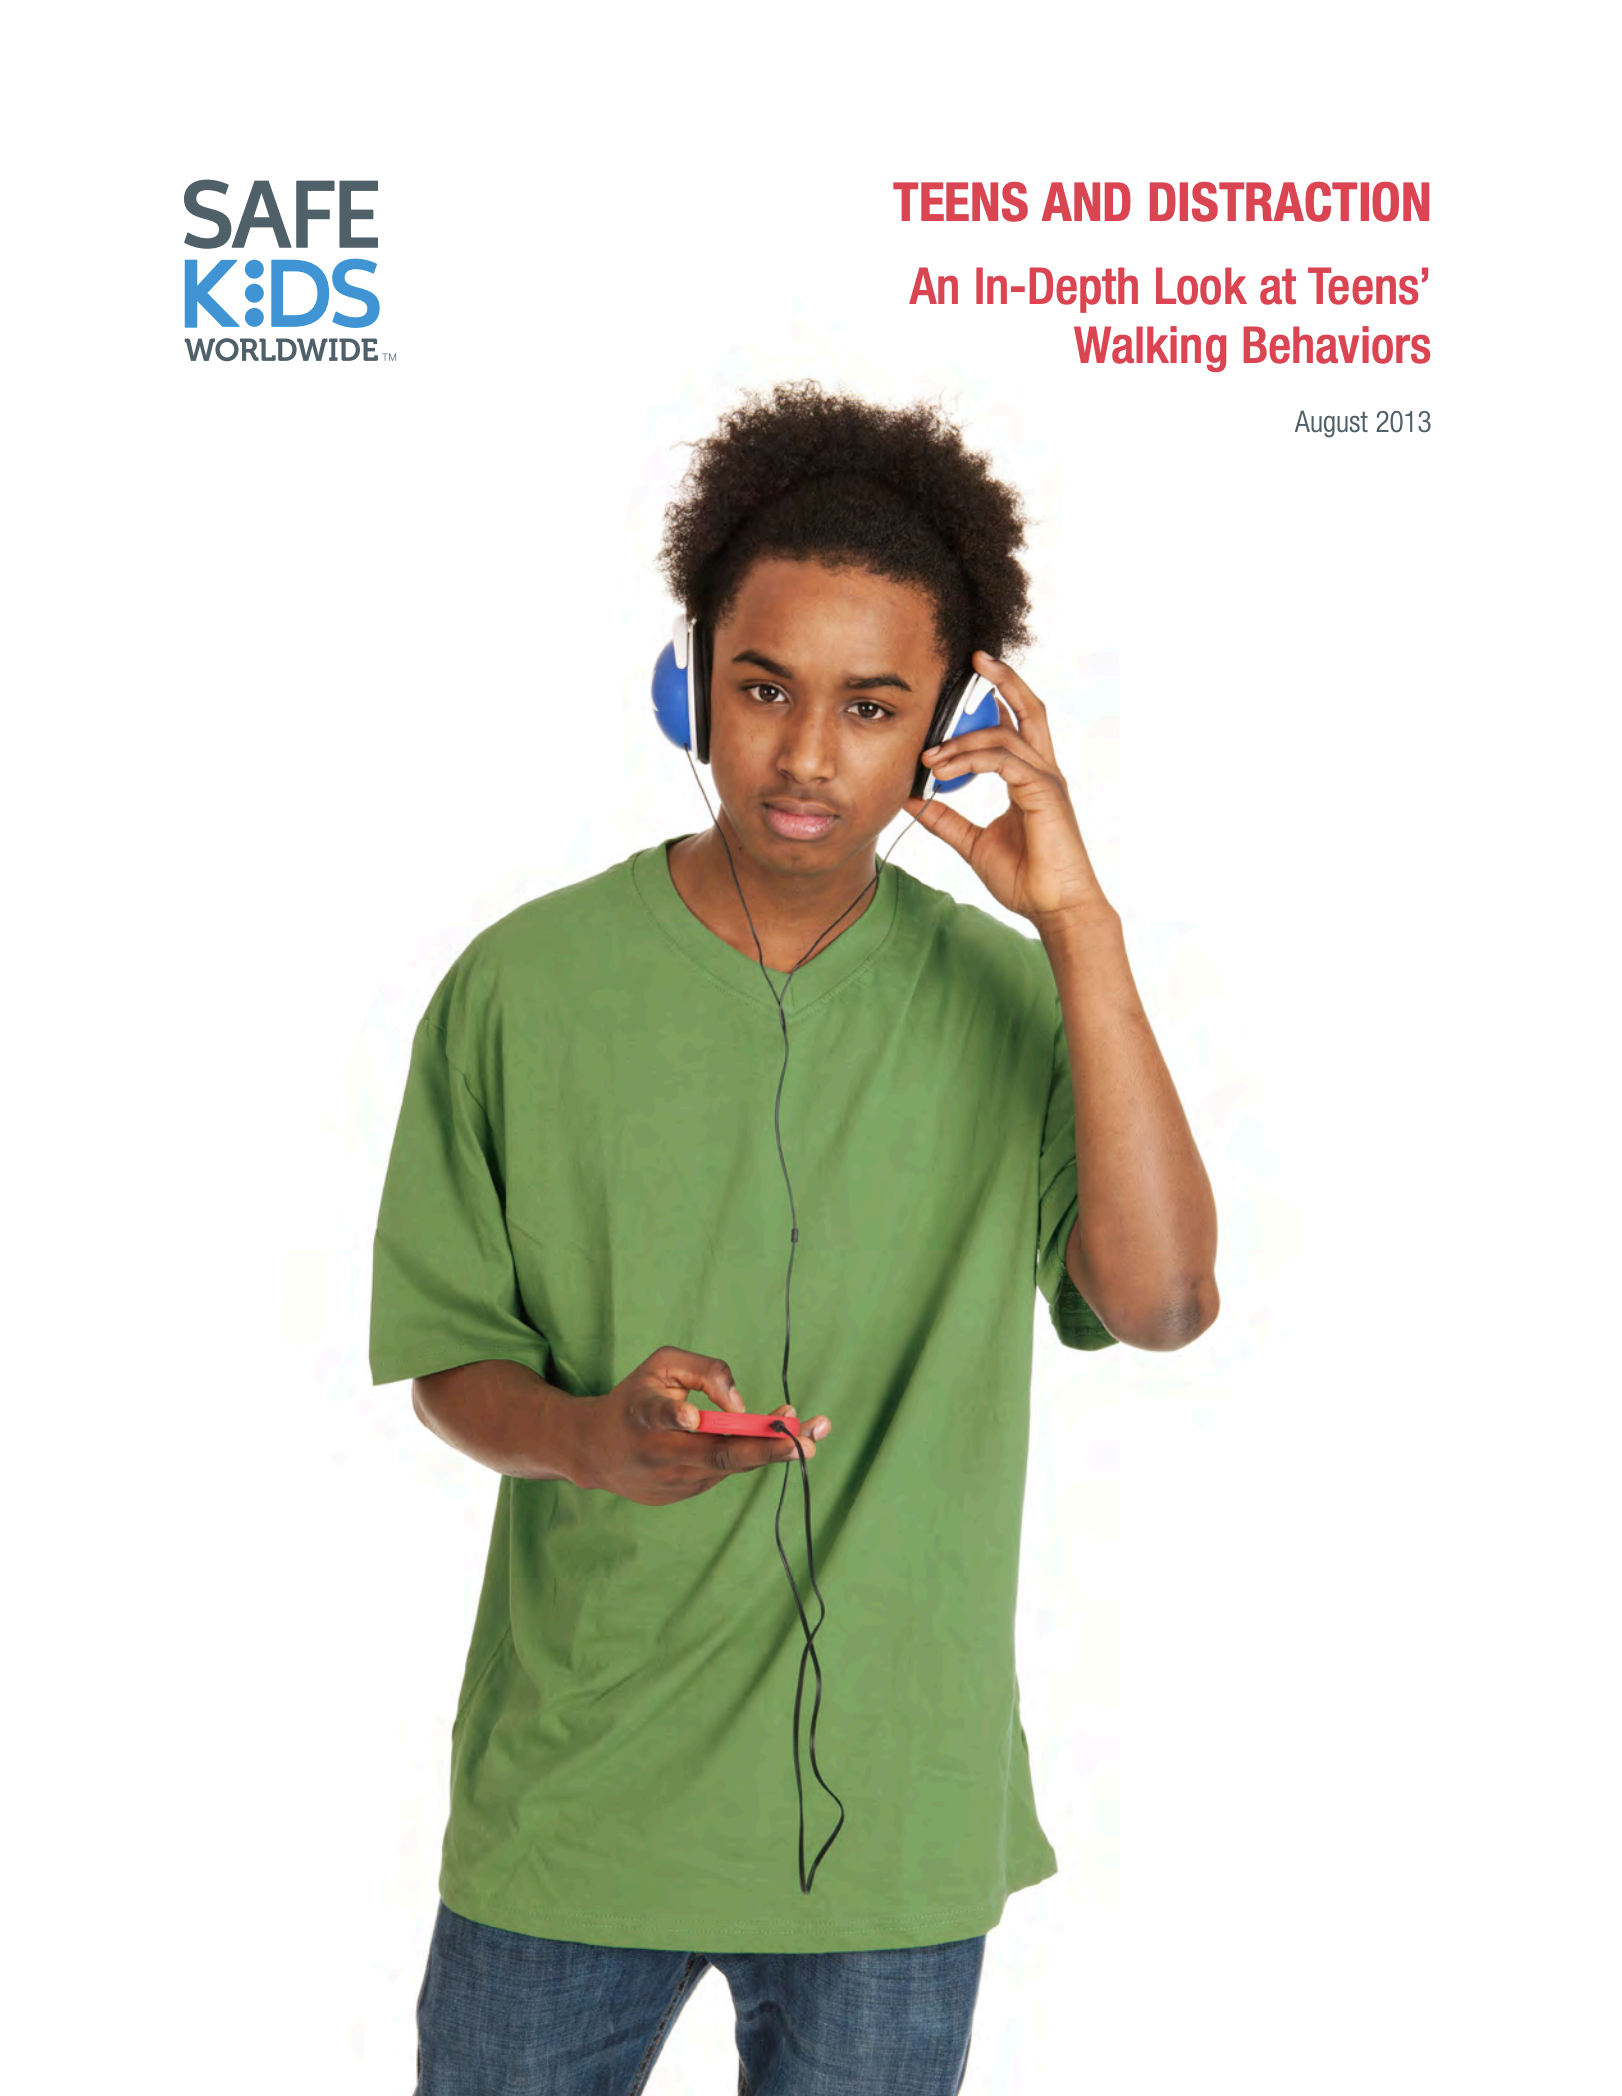 Research Report: Teens and Distraction (August 2013)